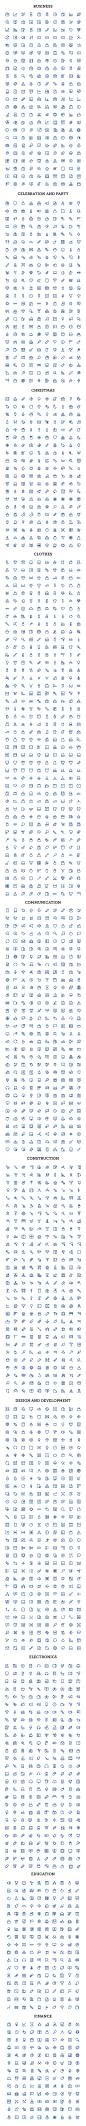 5000+ Bold Outline Icons : - 5160 Icons Included- 20 Different Categories Icons- 8 File Formats (AI, EPS, PDF, CSH, PNG, PSD, SVG and JPG)- Separated PNG Files Available in Variety of Size (48x48, 64x64, 128x128, 256x256, 512x512)- Stroke Thickness Contro